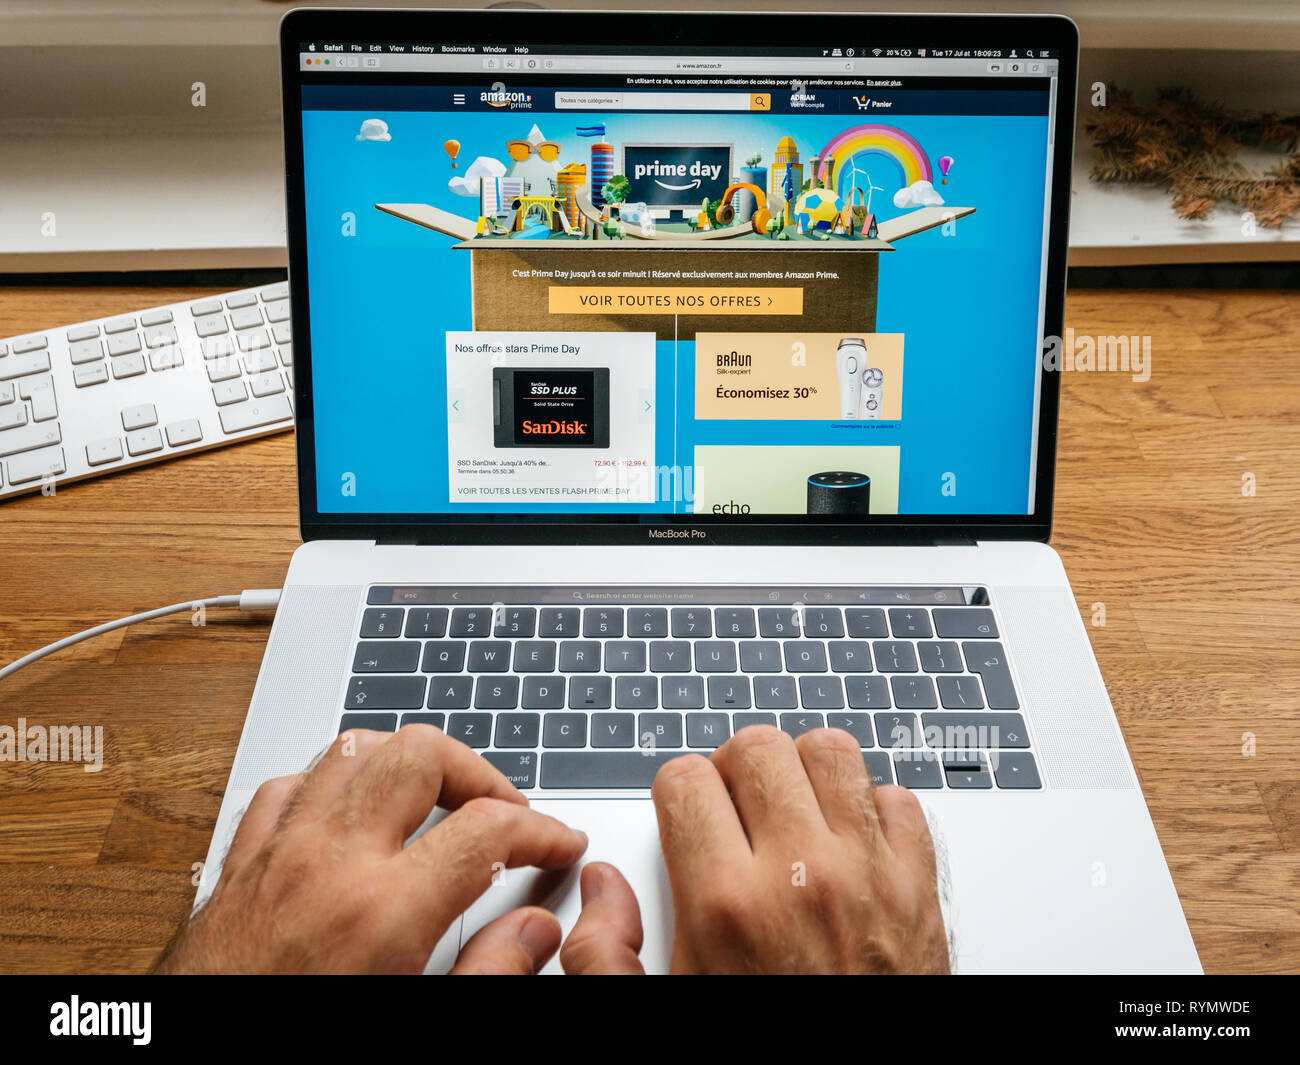 PARIS, FRANCE - JUL 16: Amazon France Prime Day animation shopping on Apple MacBook  Pro 15 laptop with Safari Internet browser open to special deals discounts  - online consumerism shopping Stock Photo - Alamy